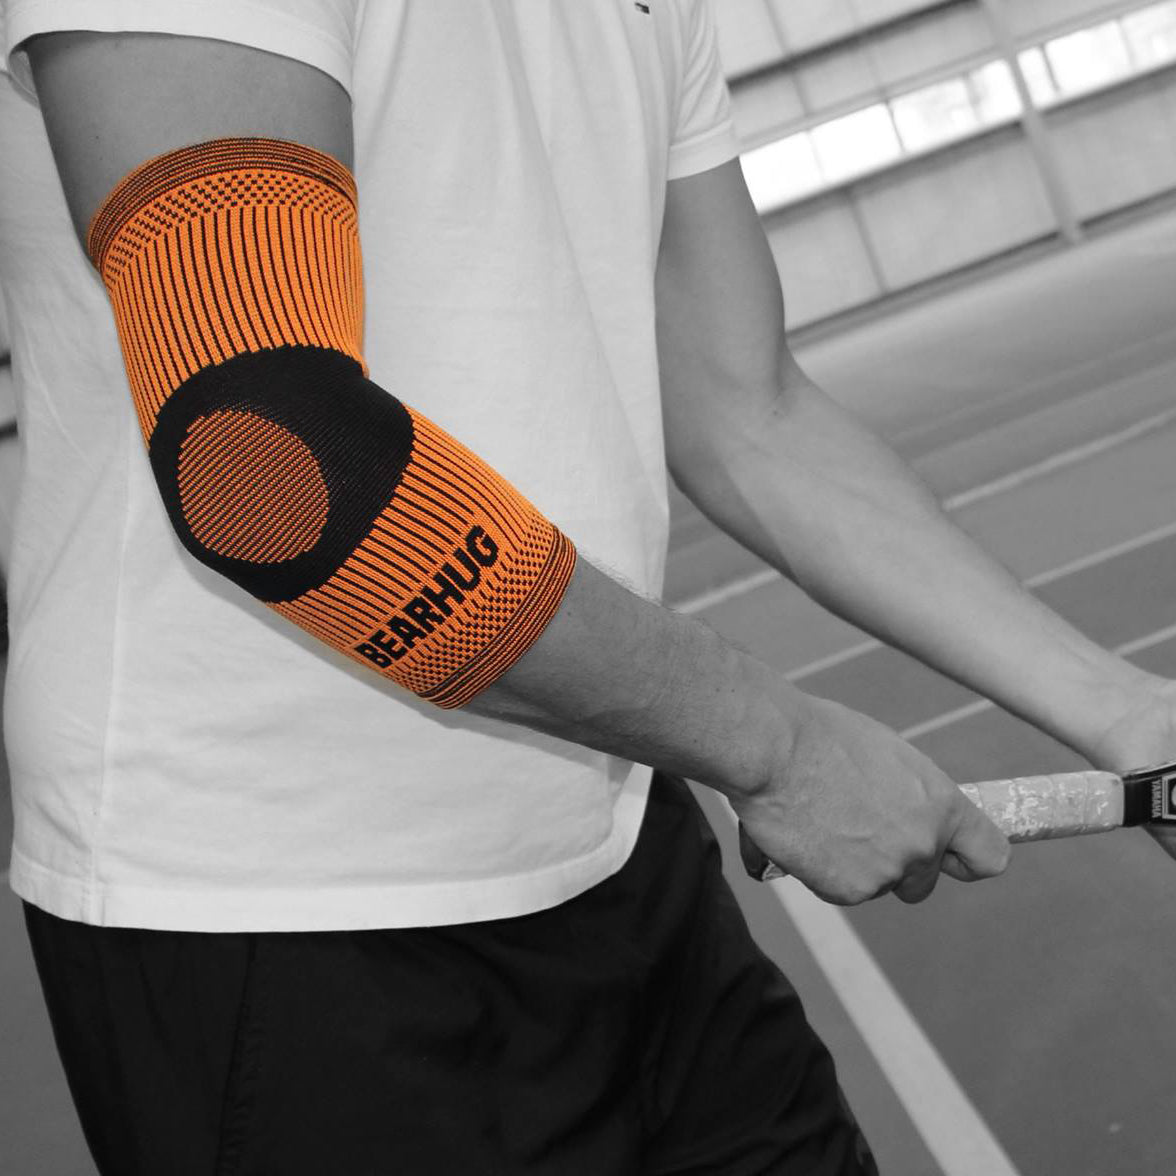 BEARHUG ELBOW COMPRESSION SUPPORT SLEEVE FOR TENNIS ELBOW RECOVERY - BAMBOO